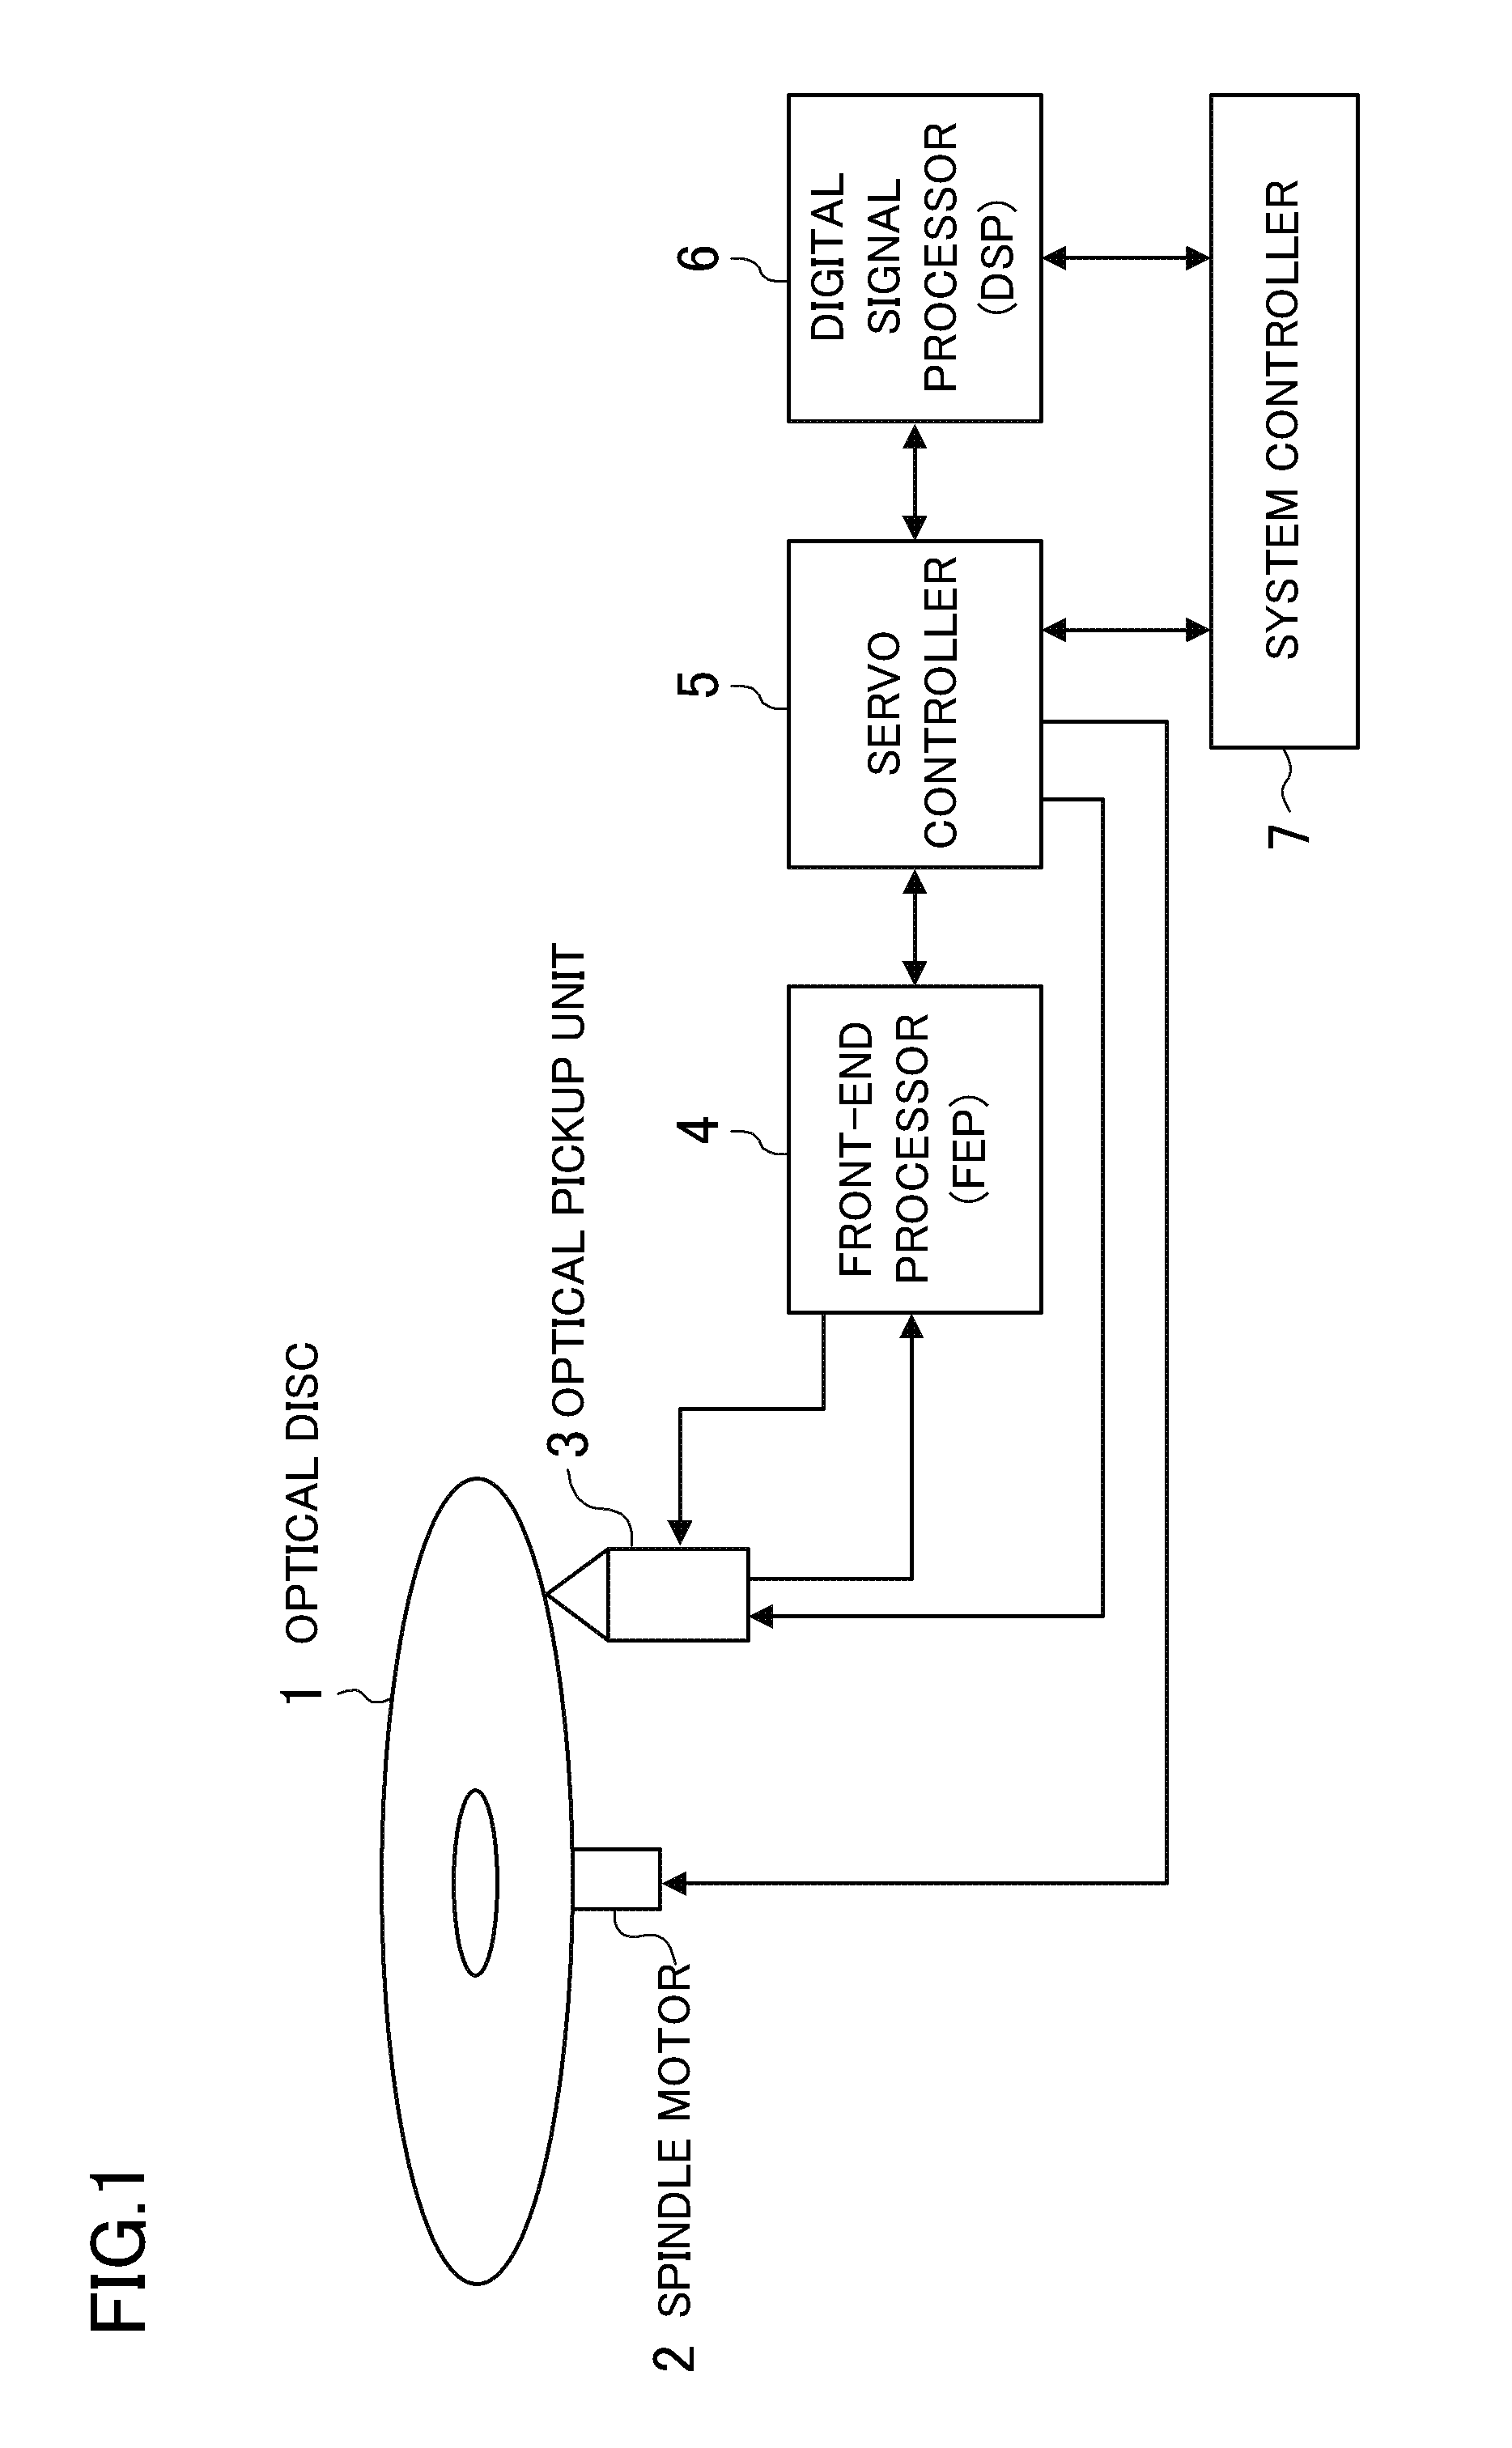 Amplifier circuit and optical pickup device